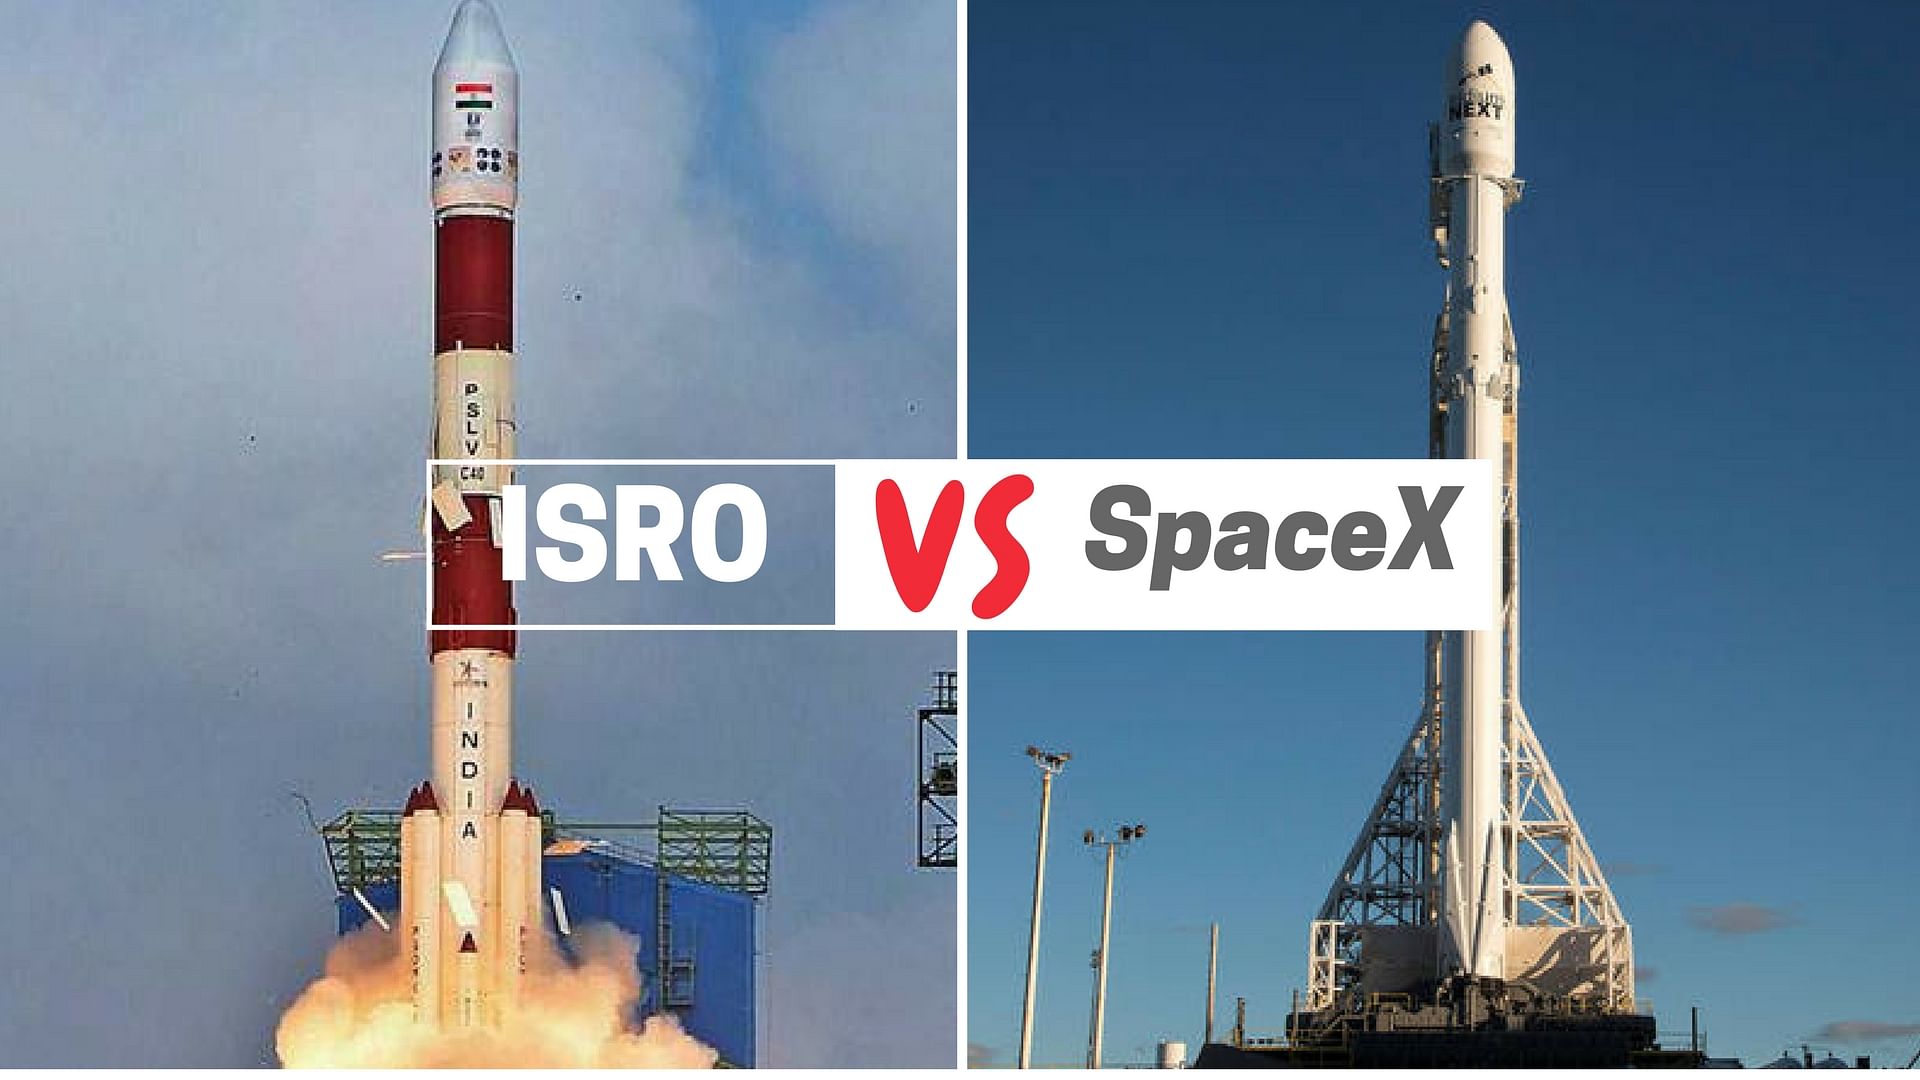 ISRO’s PSLV C-40 (left) and SpaceX’s Falcon 9 rocket (right).